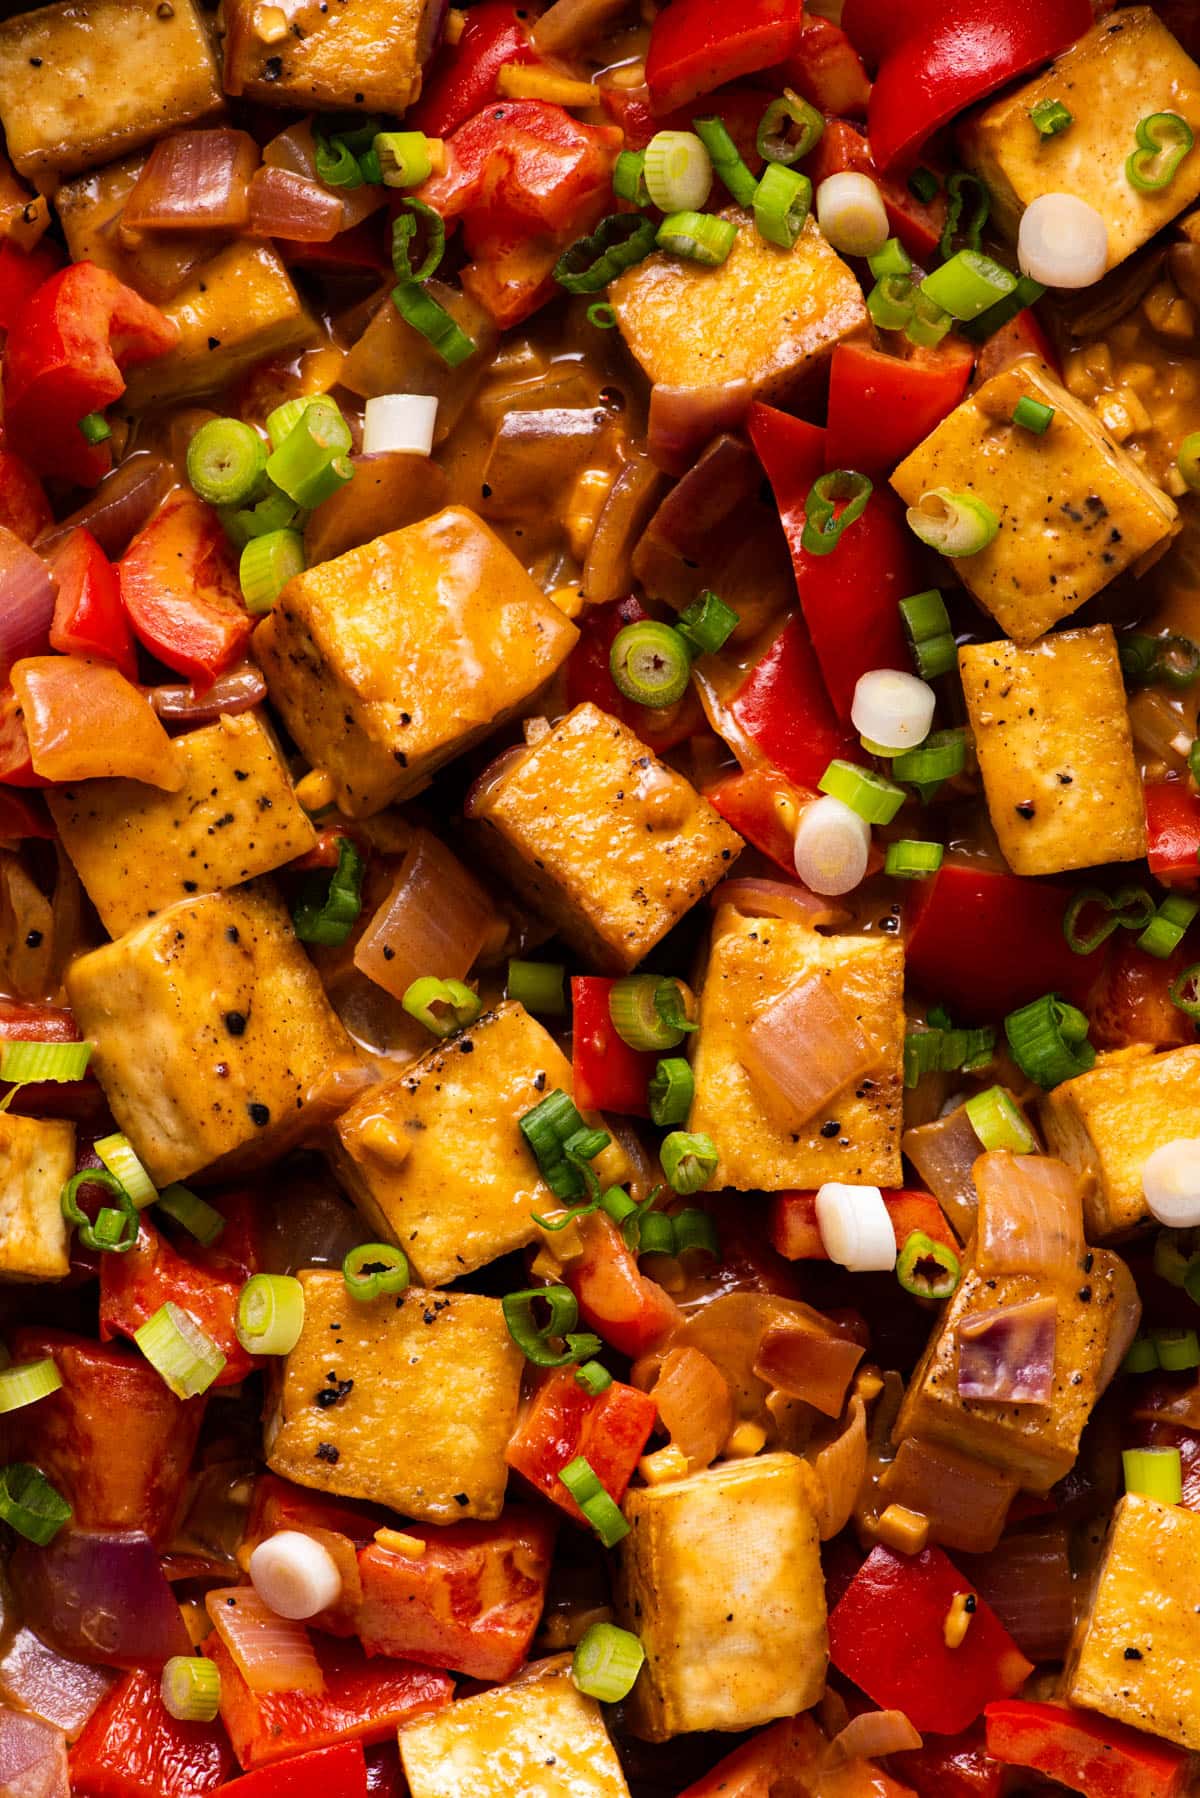 Tofu stir-fry with peanut sauce, peppers, and onions.